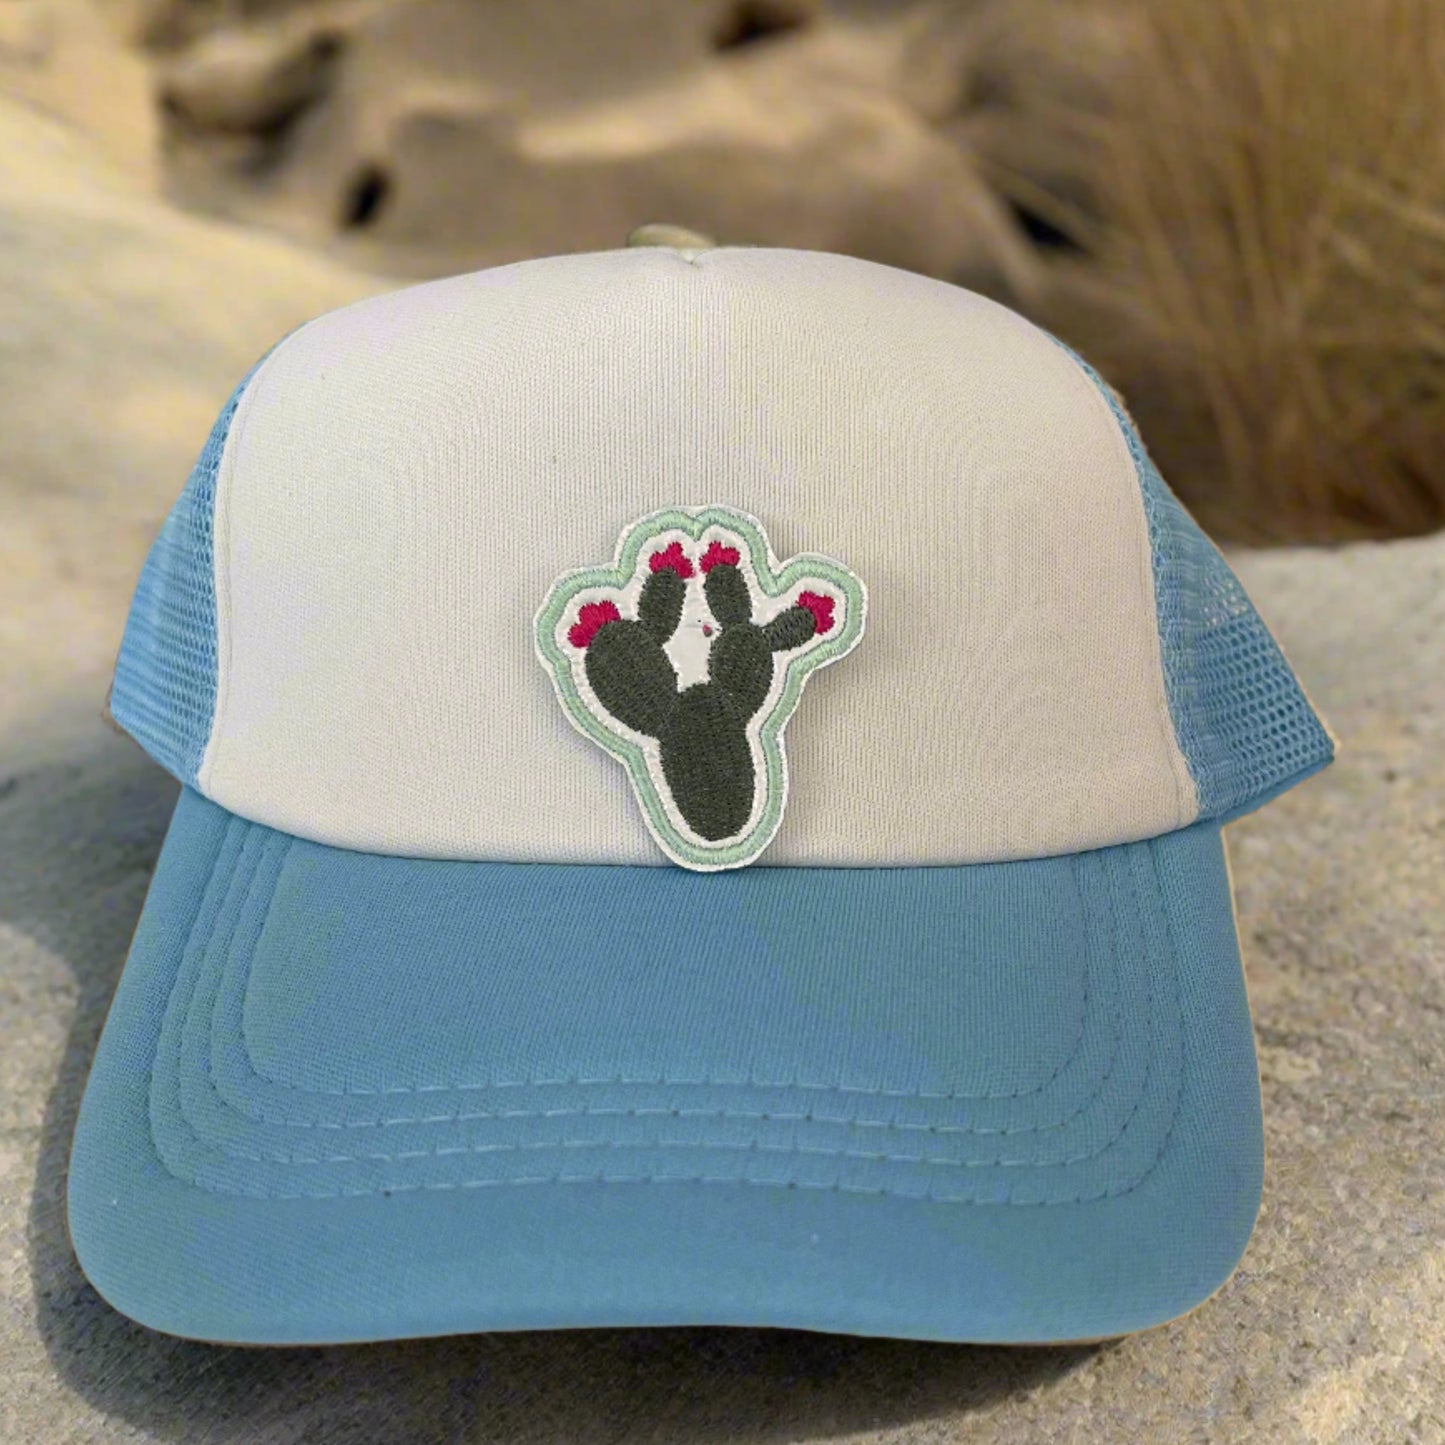 Close-up of a Southwest Cactus embroidered patch featuring a green cactus with pink flowers, perfect for customizing hats, apparel, and various accessories.